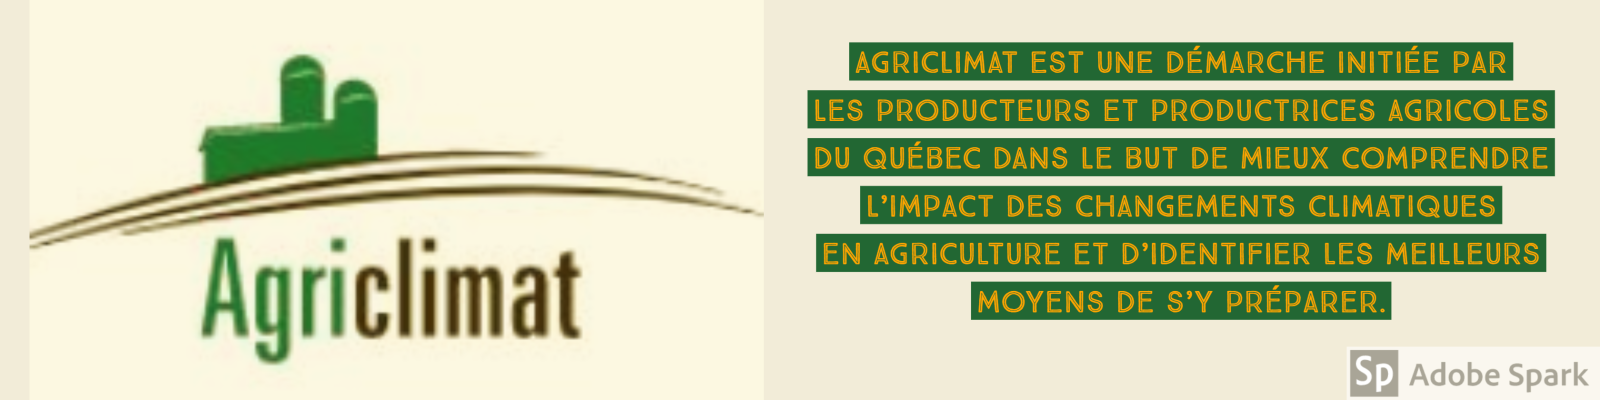 Agriclimat